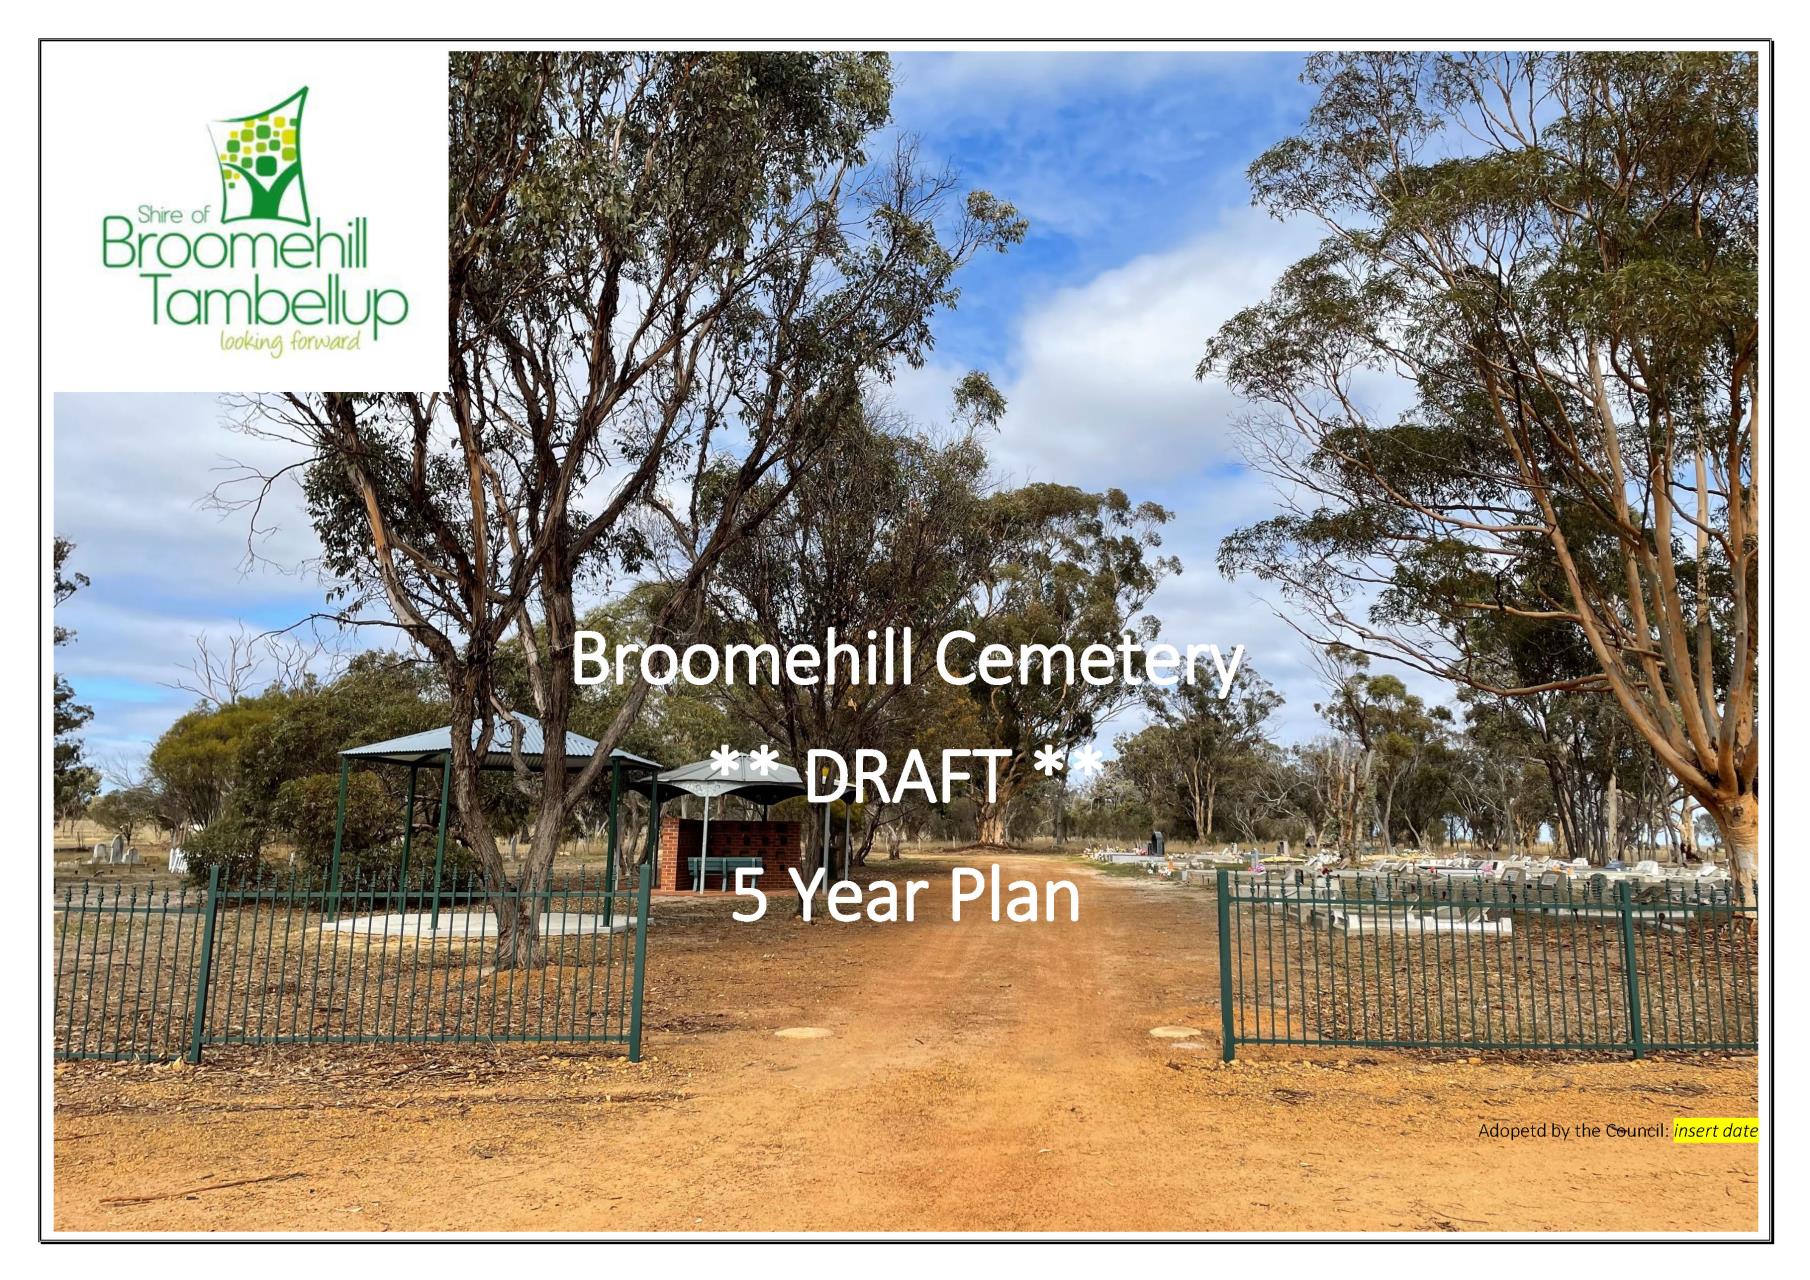 Cover page of Broomehill Cemetery Draft 5 Year Plan document